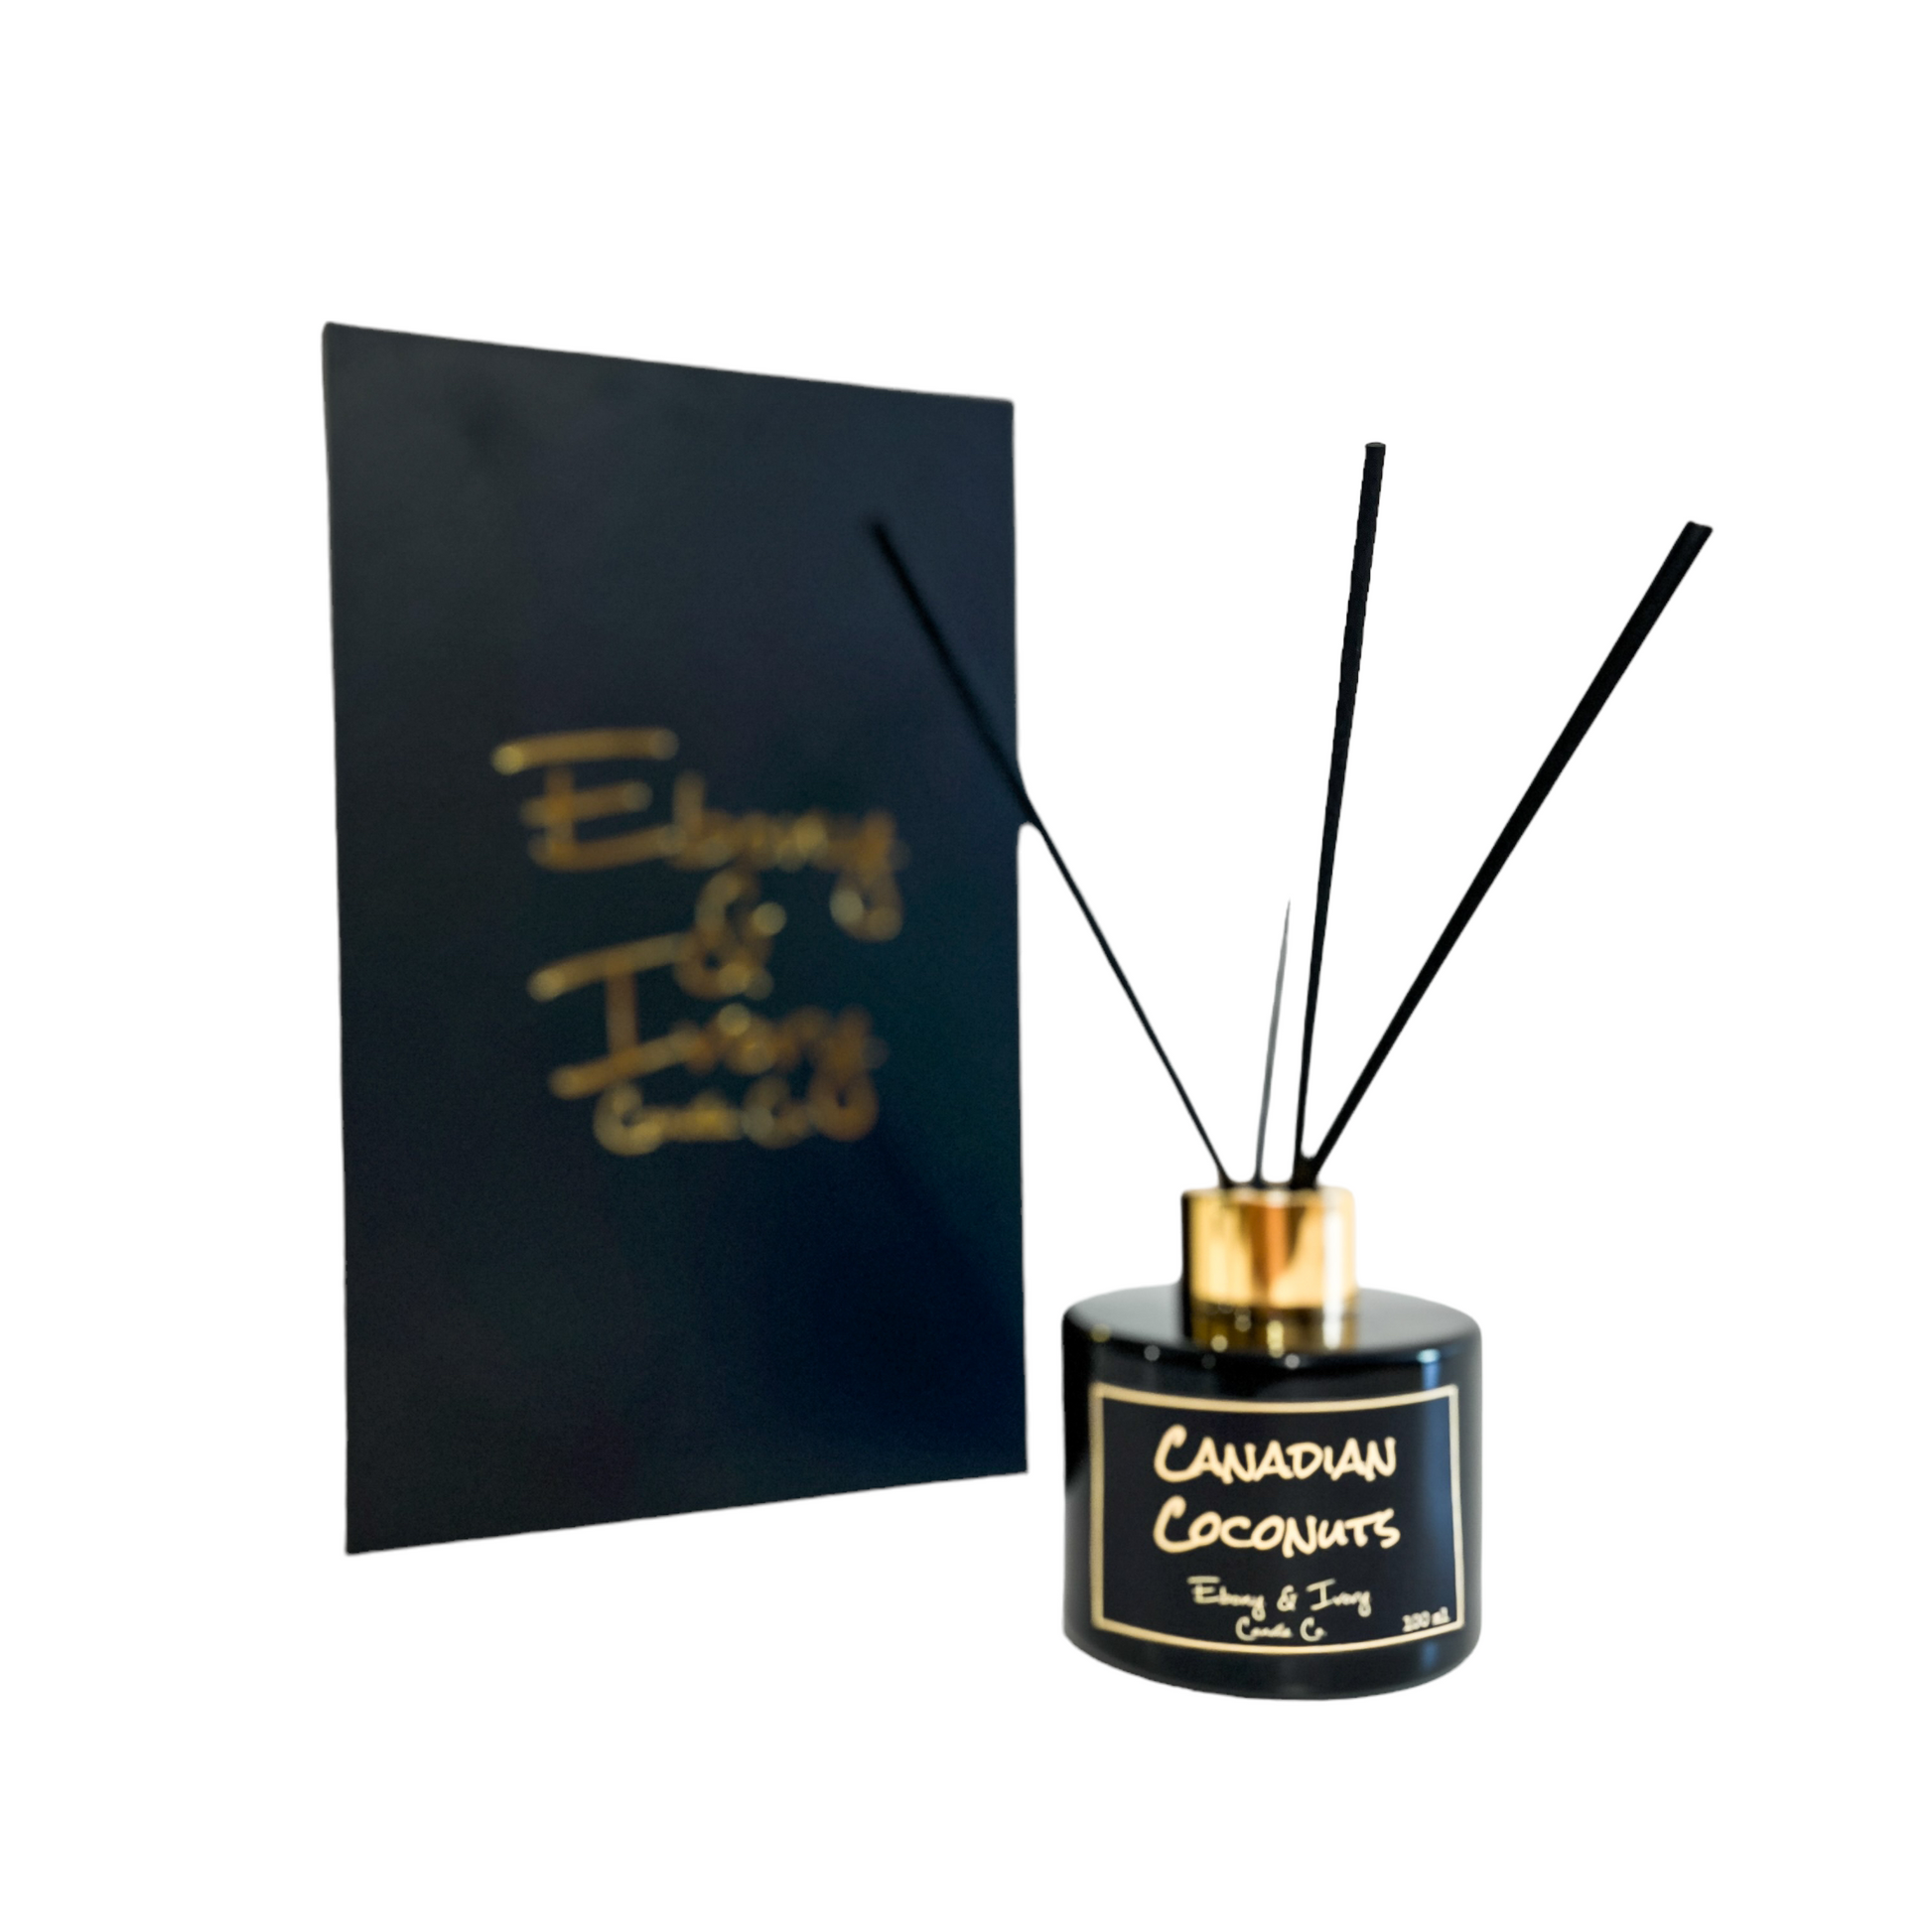 Black, one hundred milliliters, coconut, pineapple, and vanilla scented reed diffuser with a gold lid and a black label that reads Canadian Coconuts